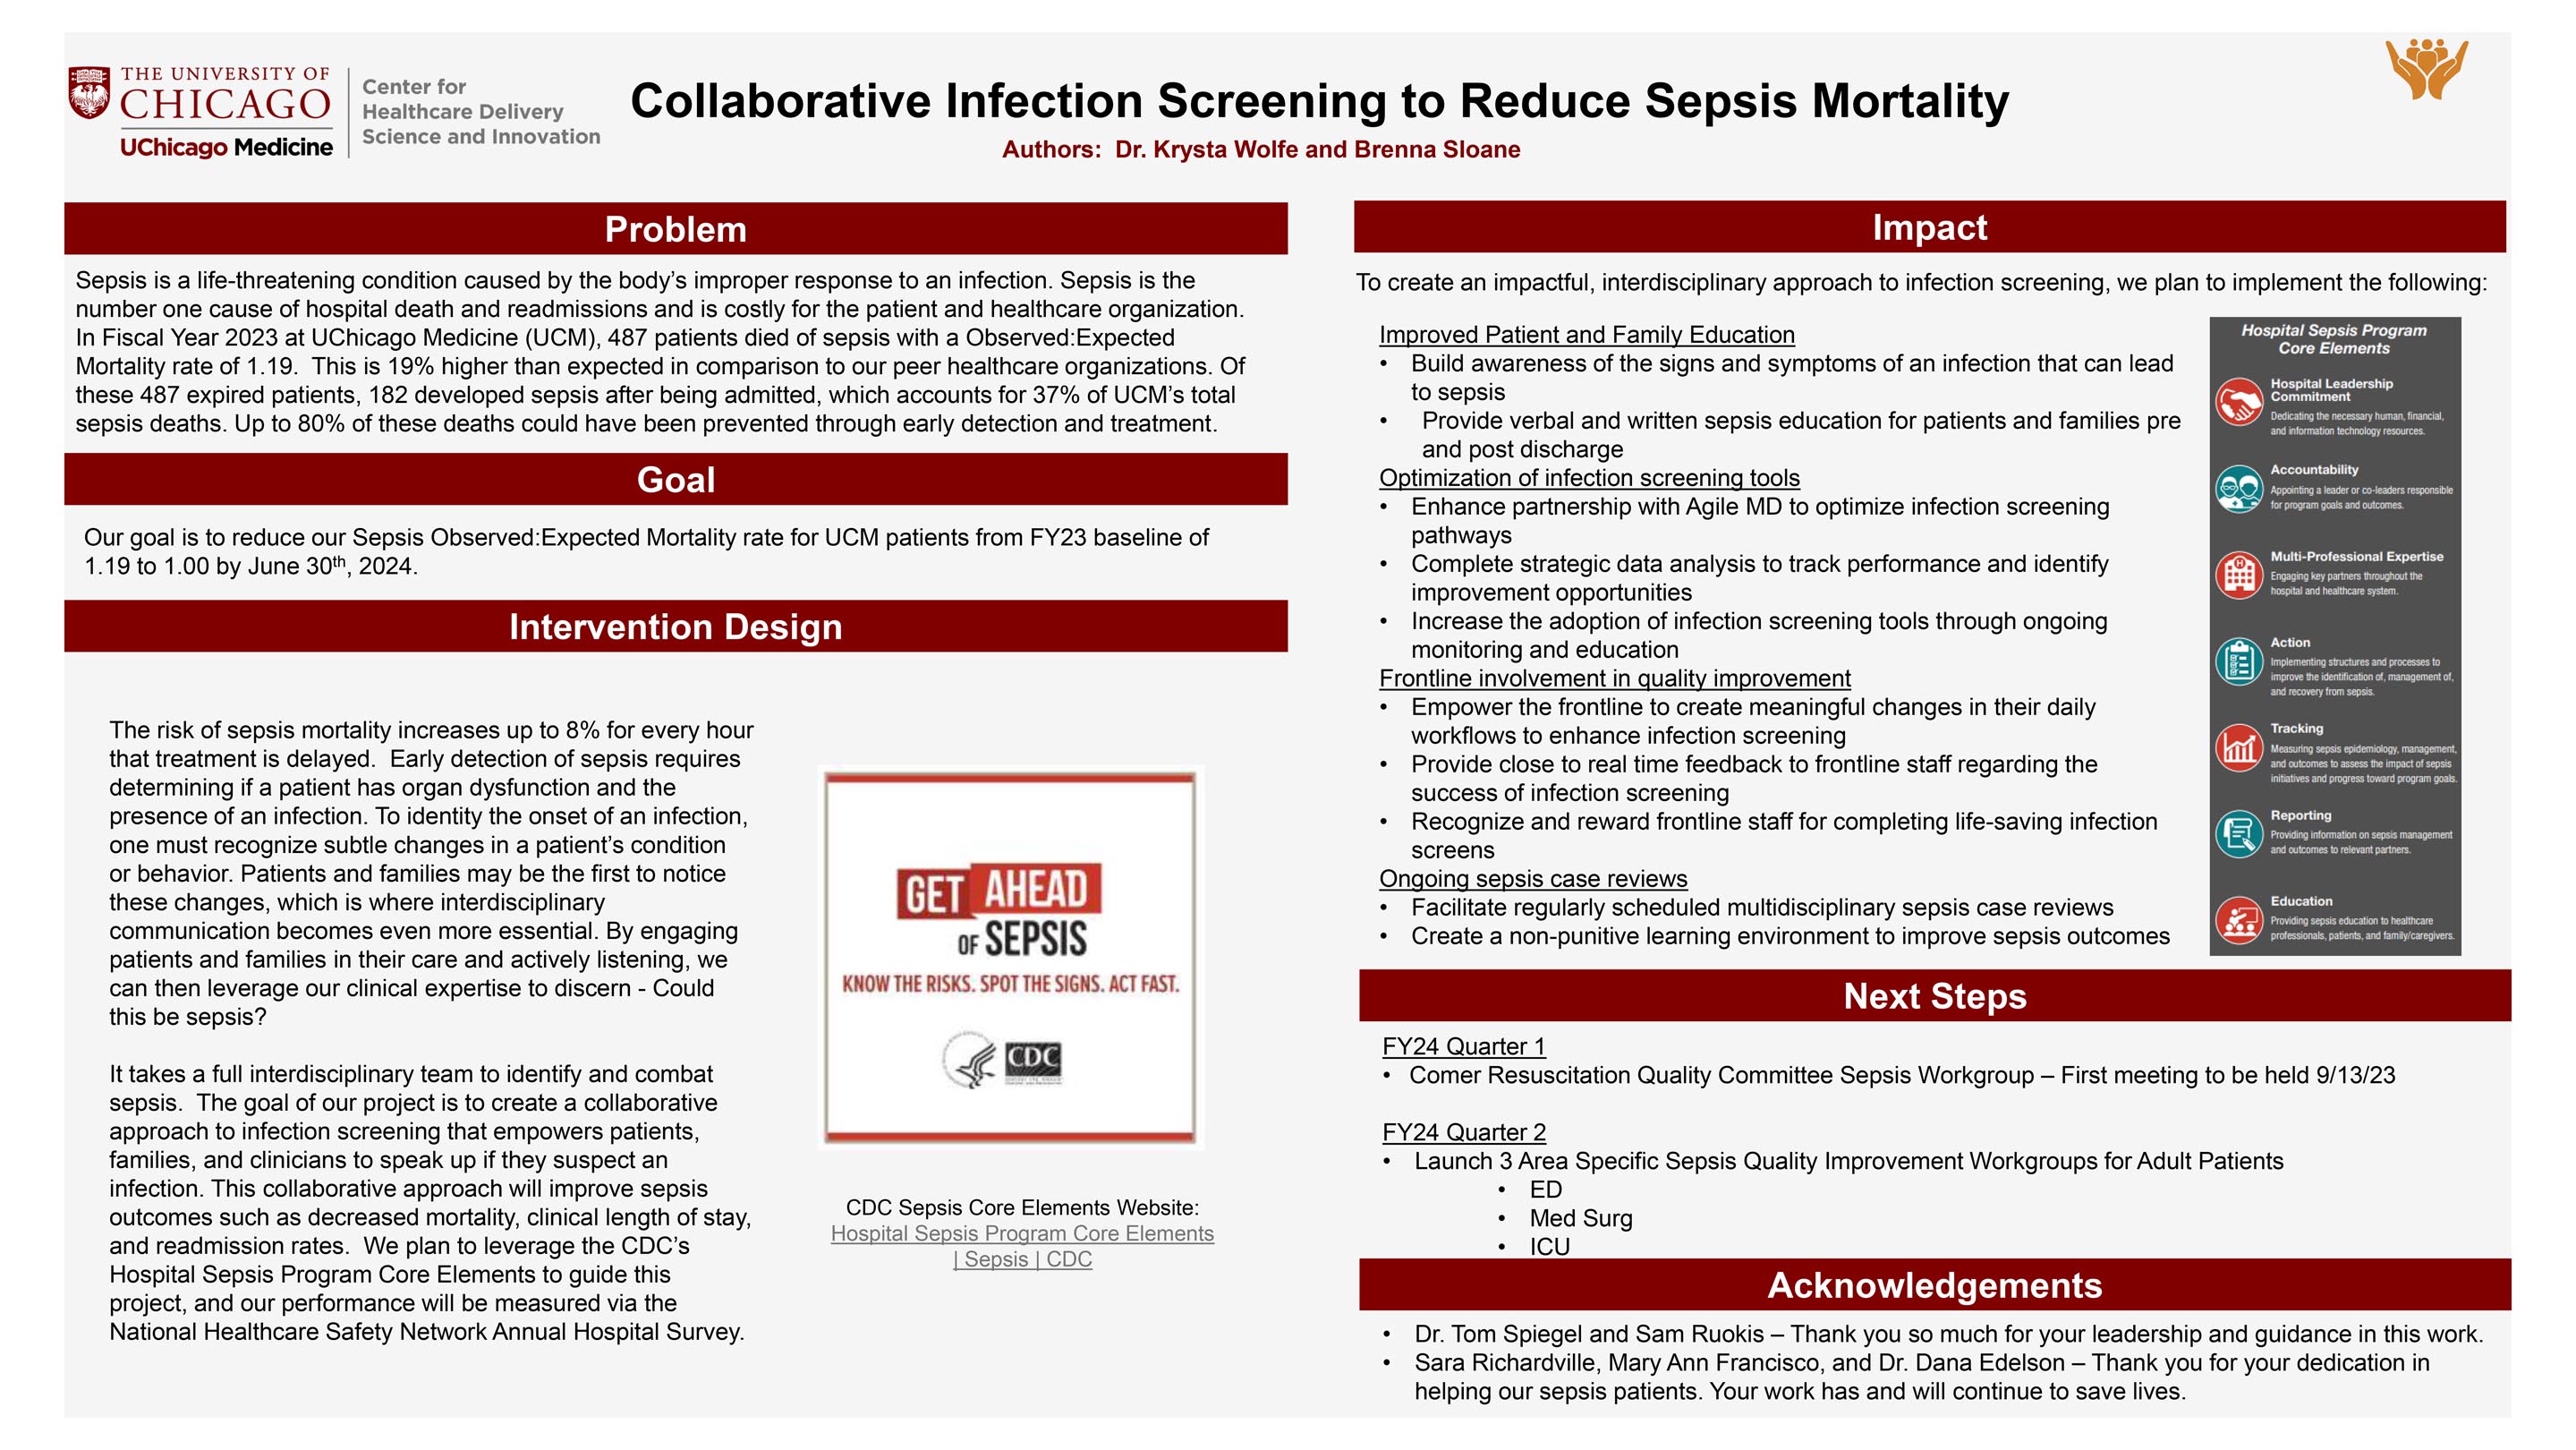 SLOANE_Collaborative Infection Screening to Reduce Sepsis Mortality